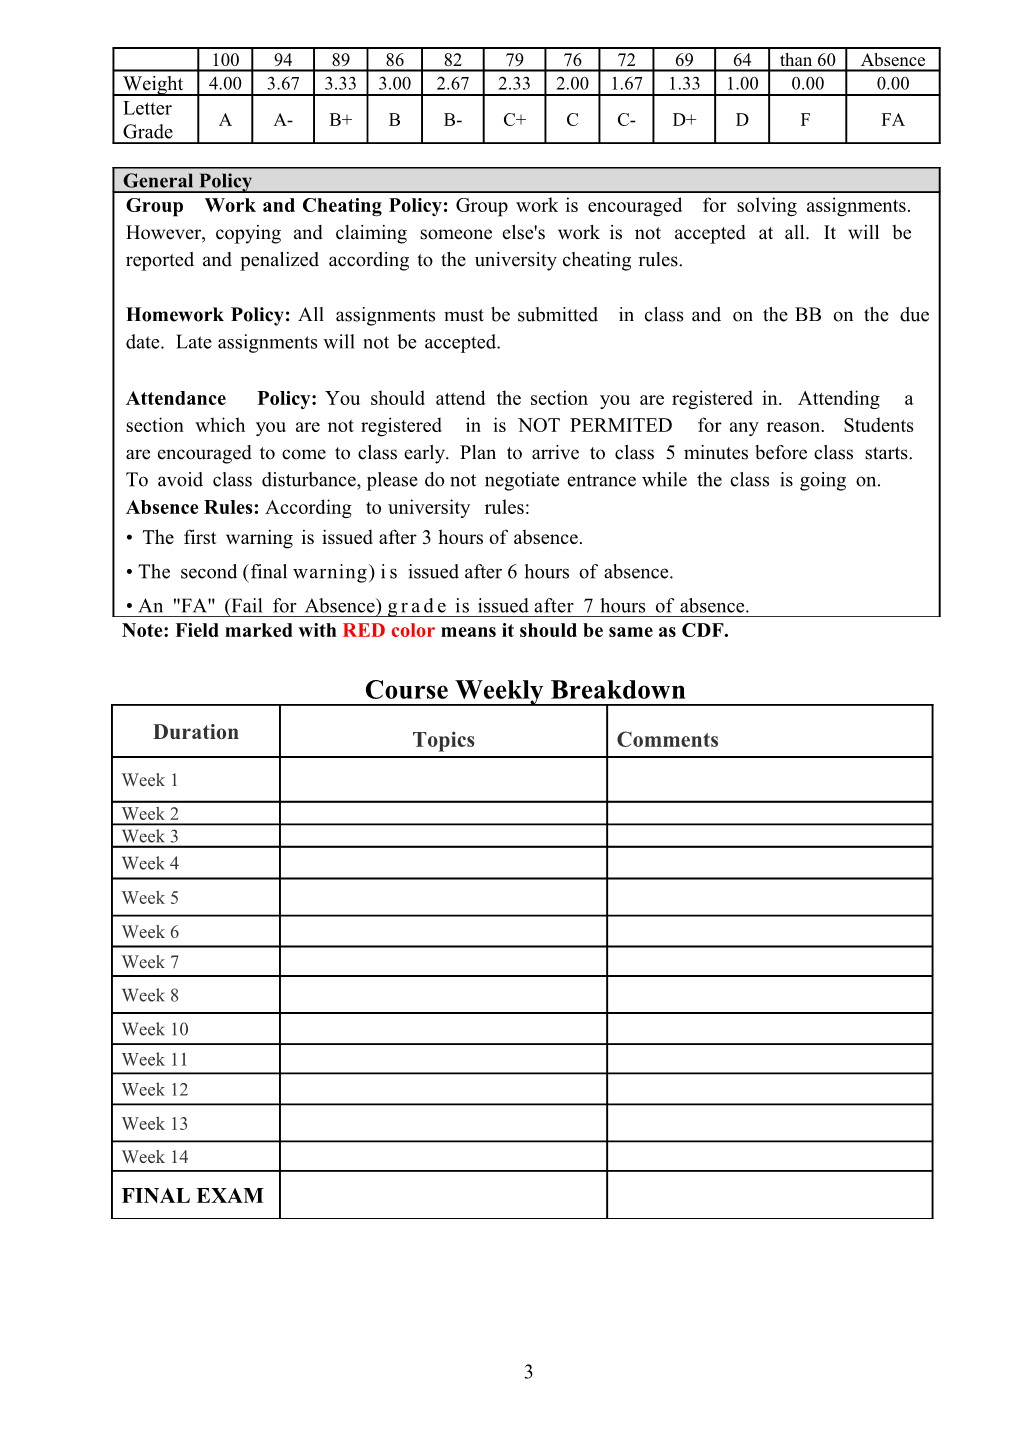 Course Contract (Course Outline and Syllabus)